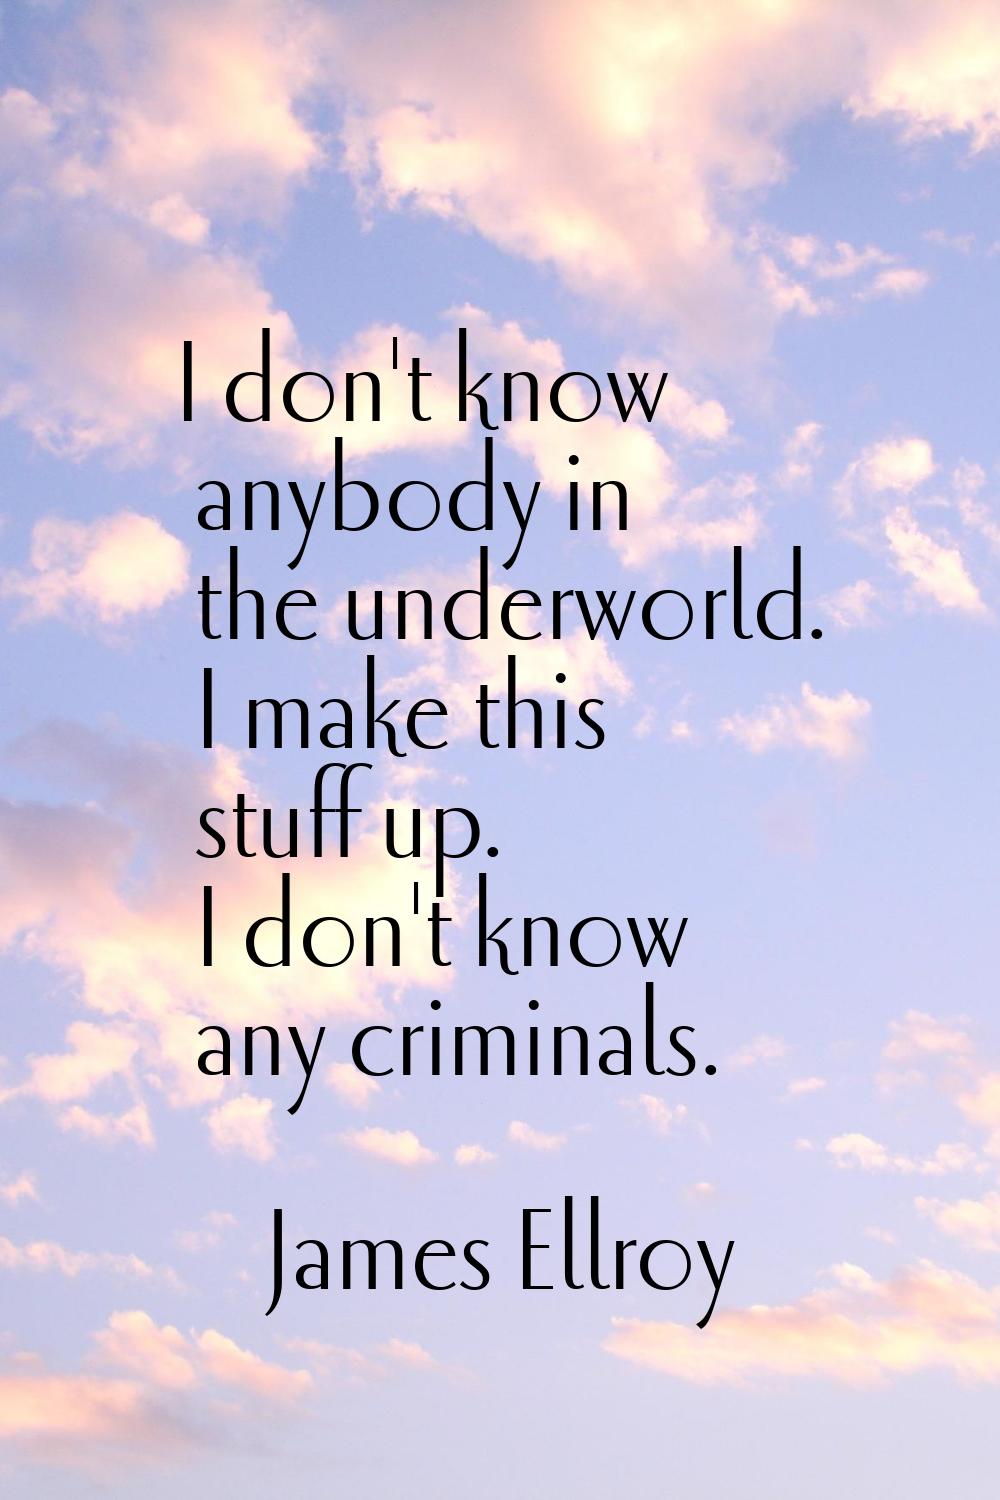 I don't know anybody in the underworld. I make this stuff up. I don't know any criminals.